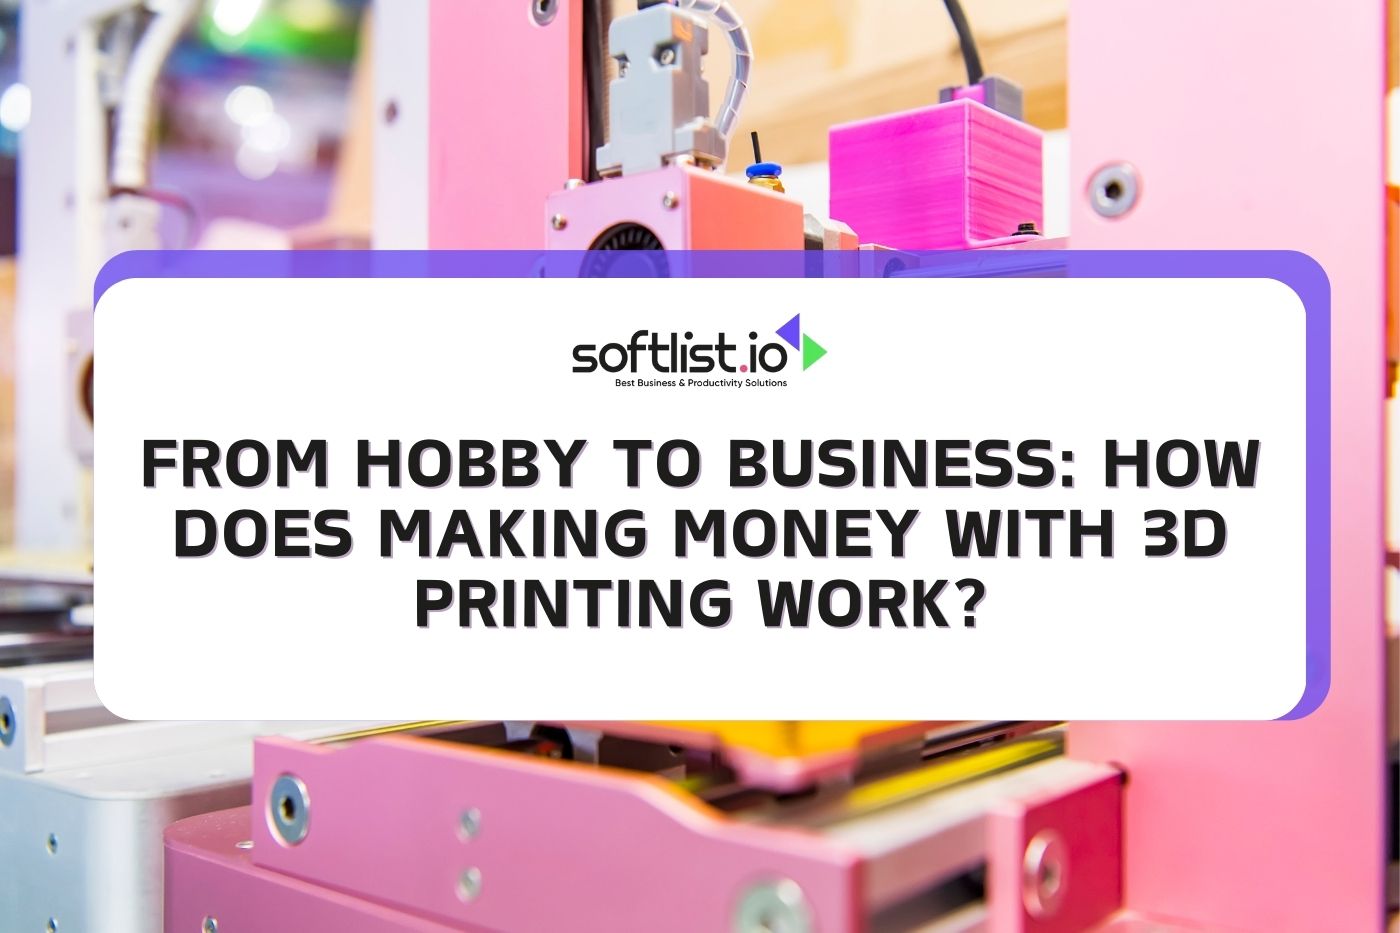 From Hobby to Business: How Does Making Money with 3D Printing Work?